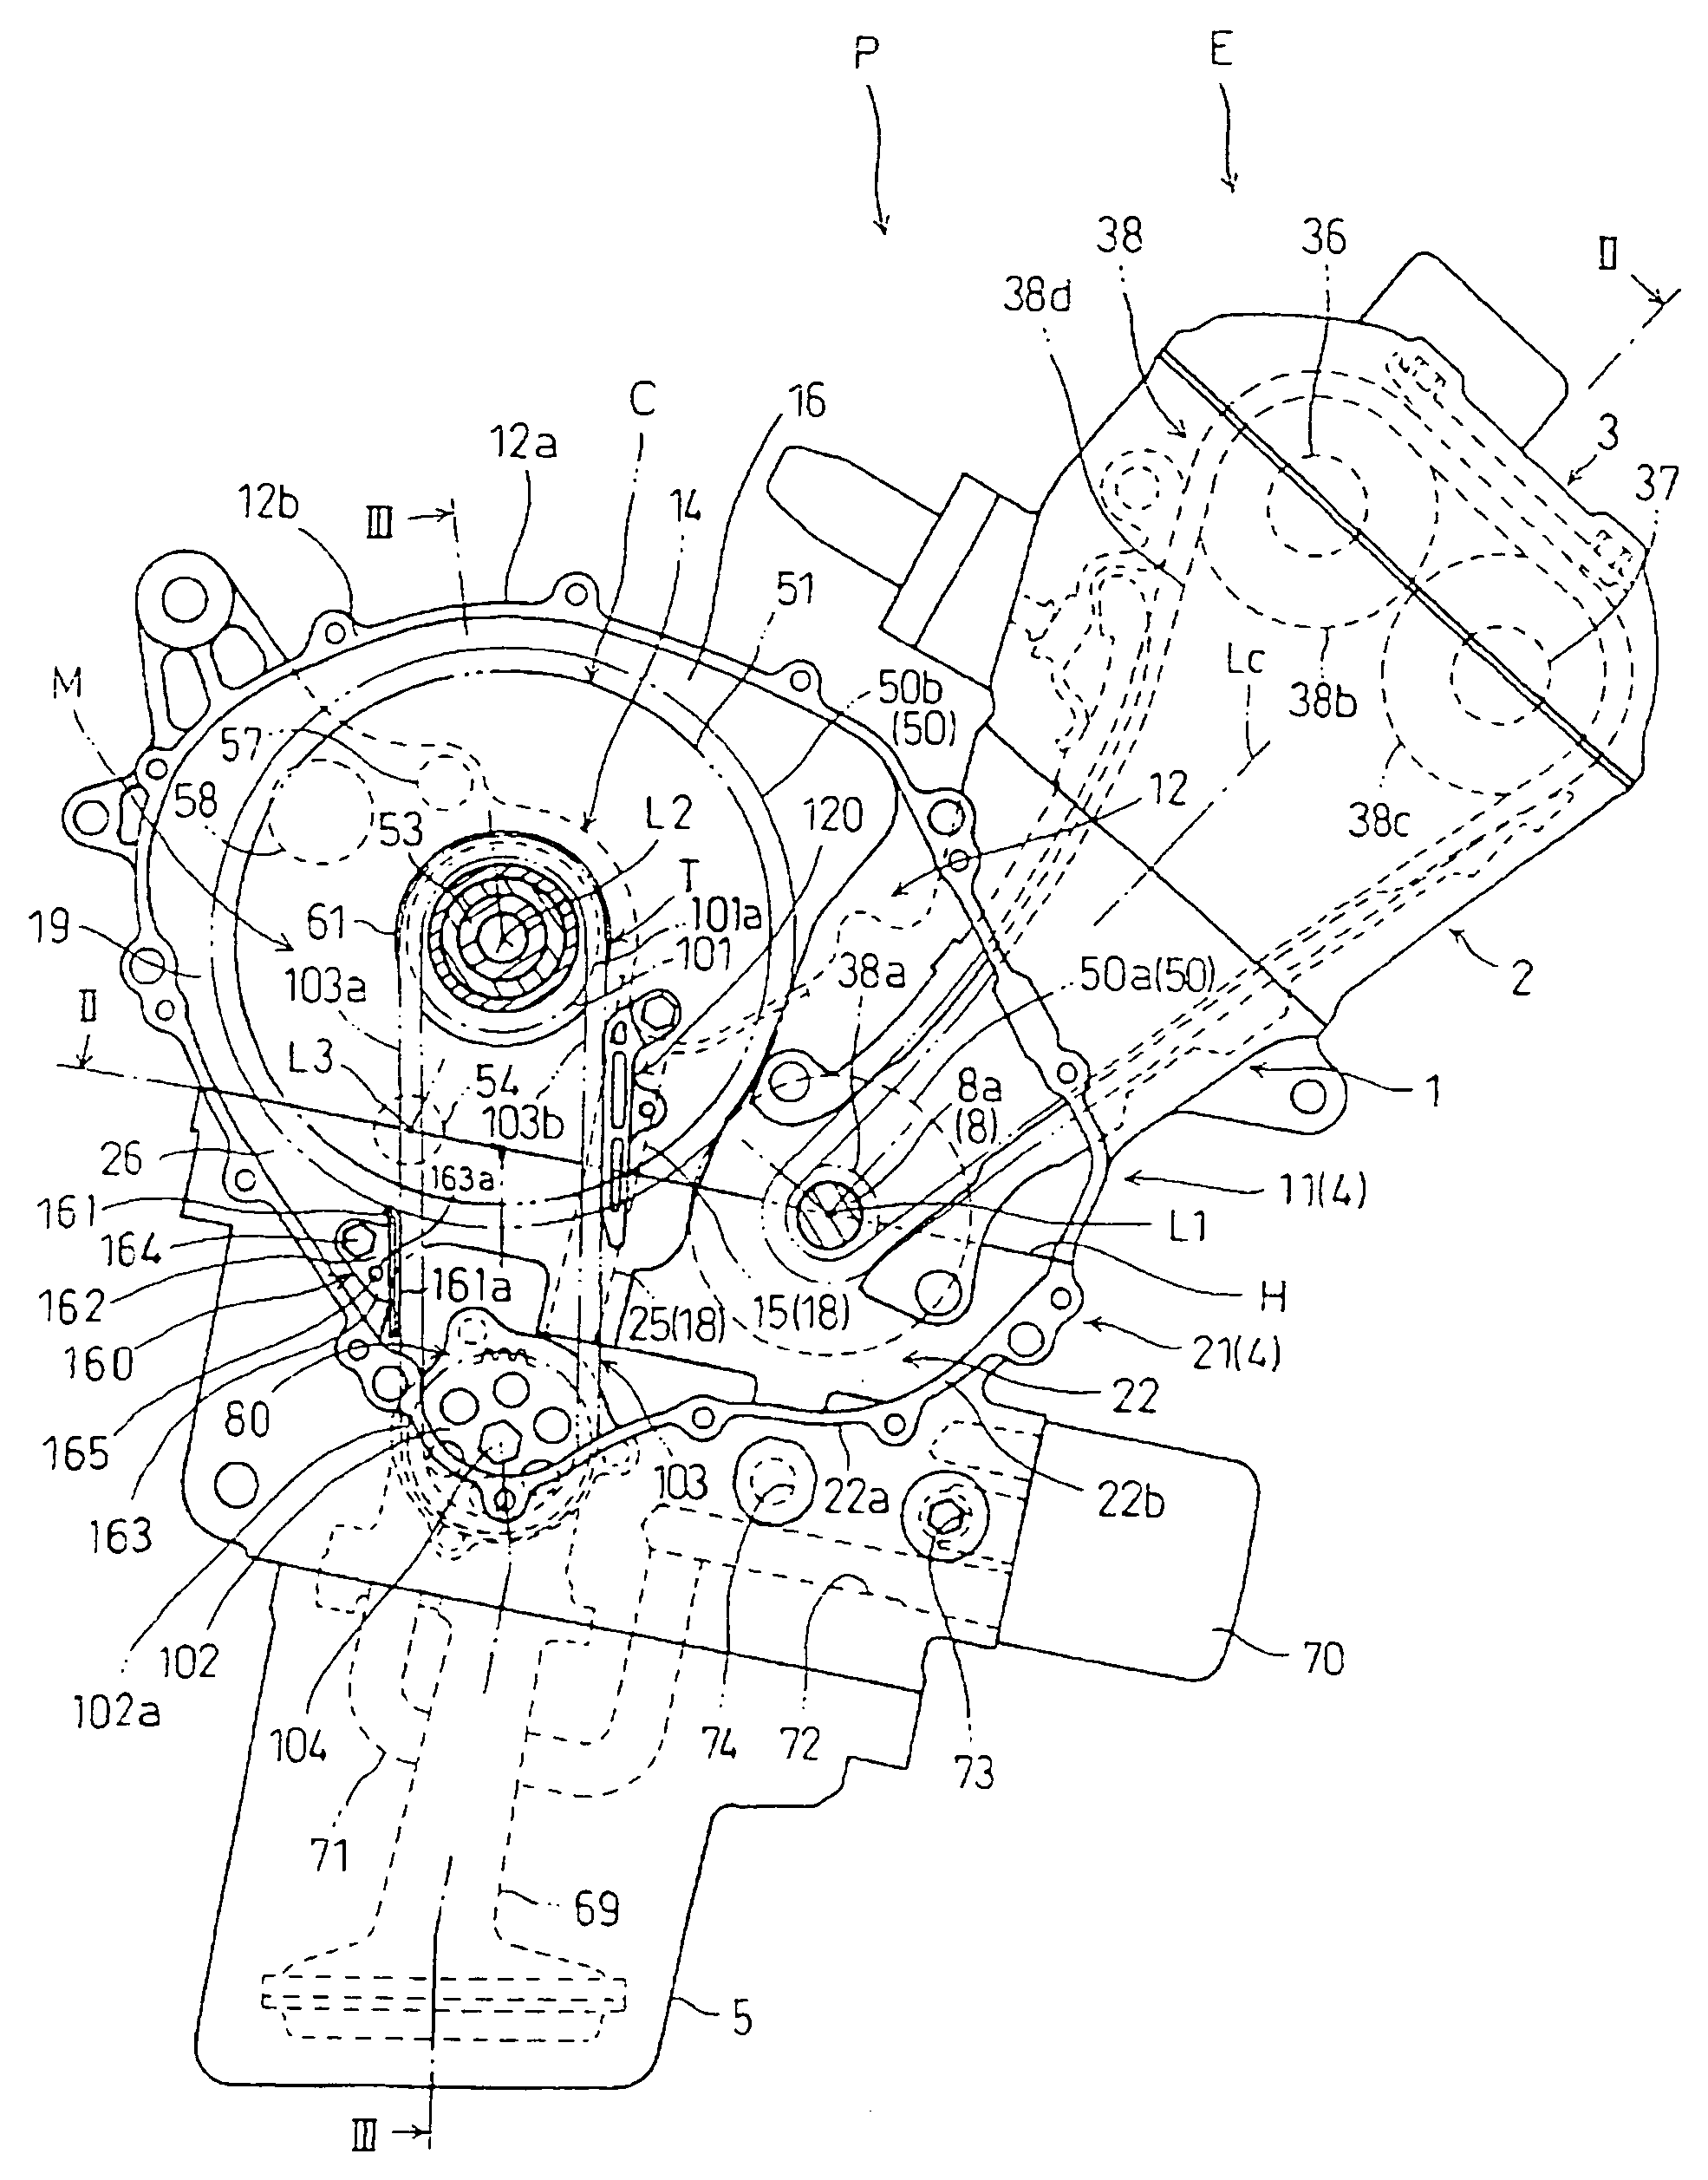 Power unit with auxiliary machine driving transmission mechanism